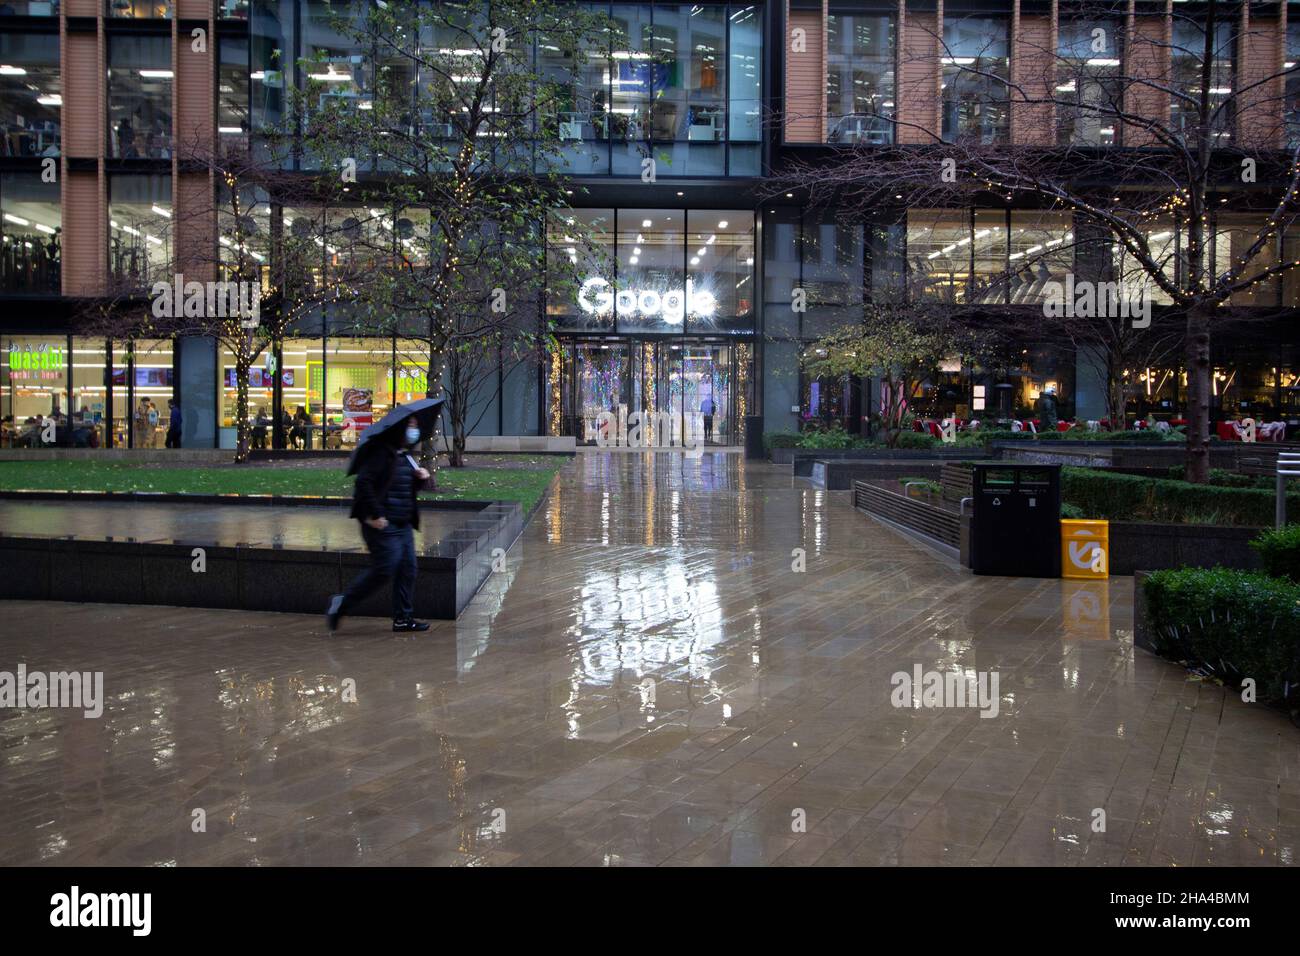 Google offices in Kings Cross London with sign reflected in rain as workers walk past building Stock Photo